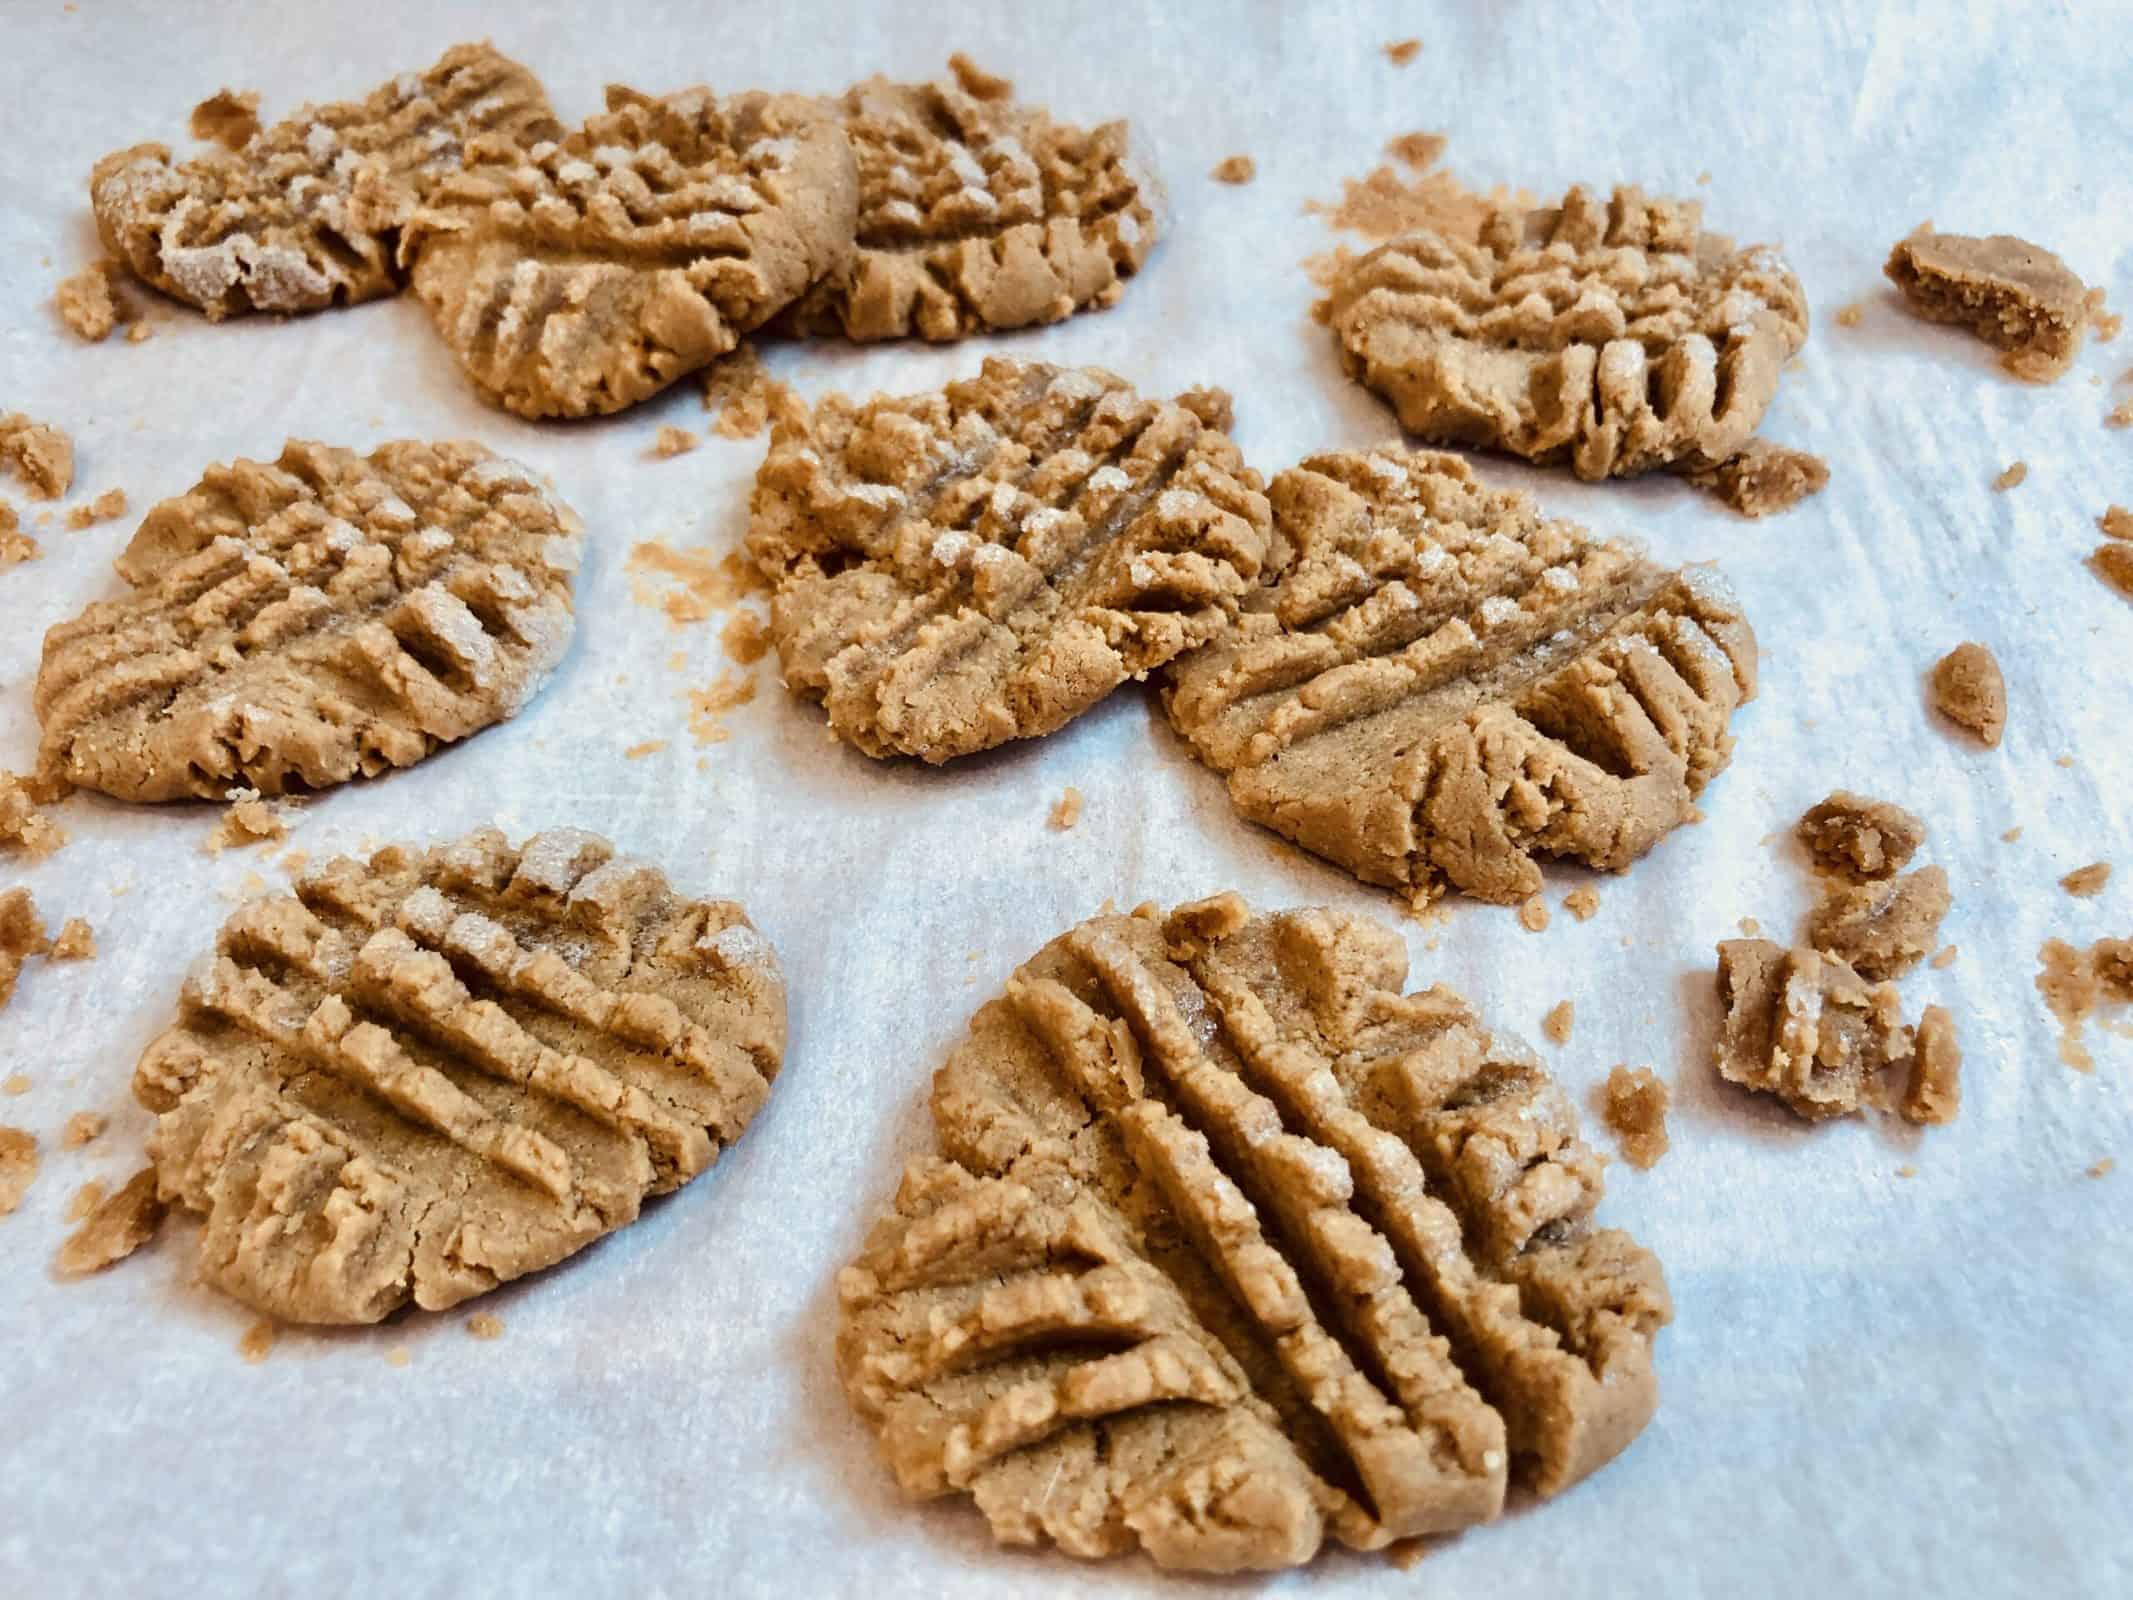 Home made Peanut butter cookies on parchment paper